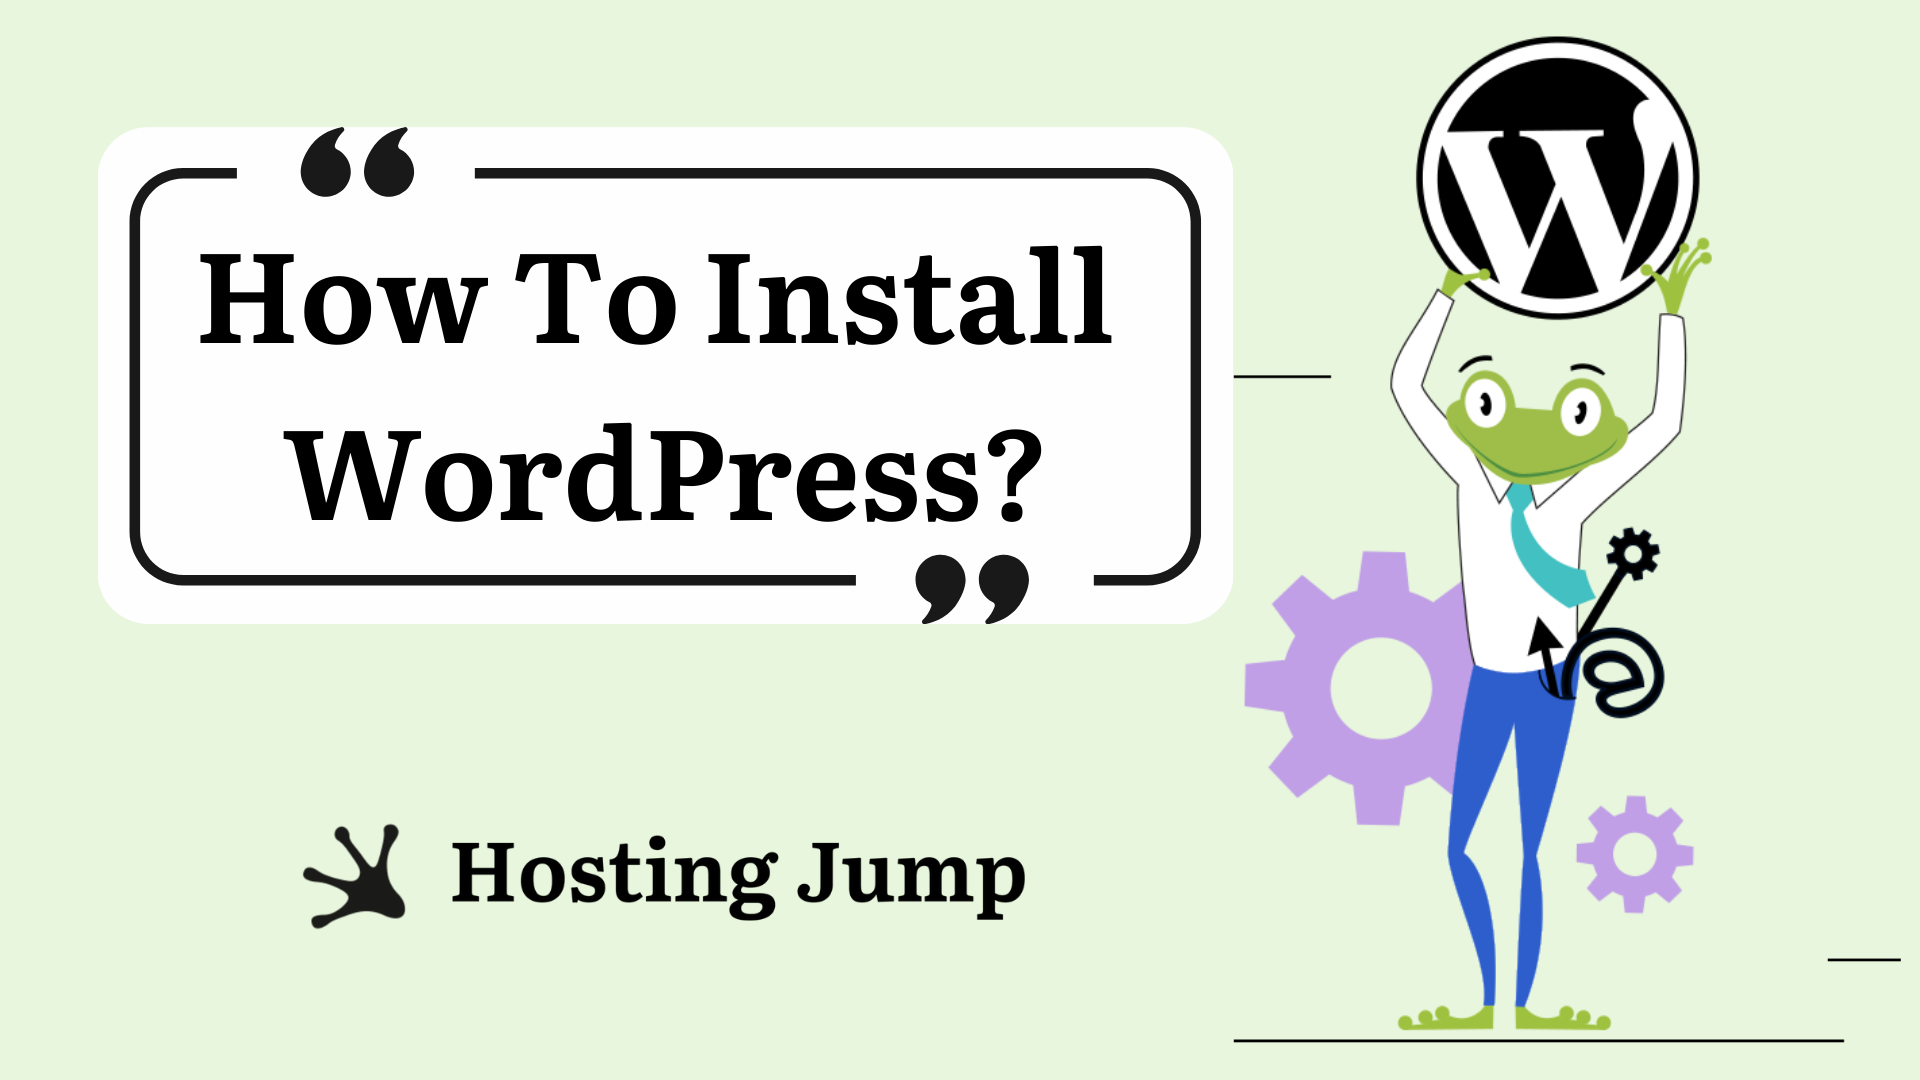 How to Install WordPress to Create a Website Quickly and Easily